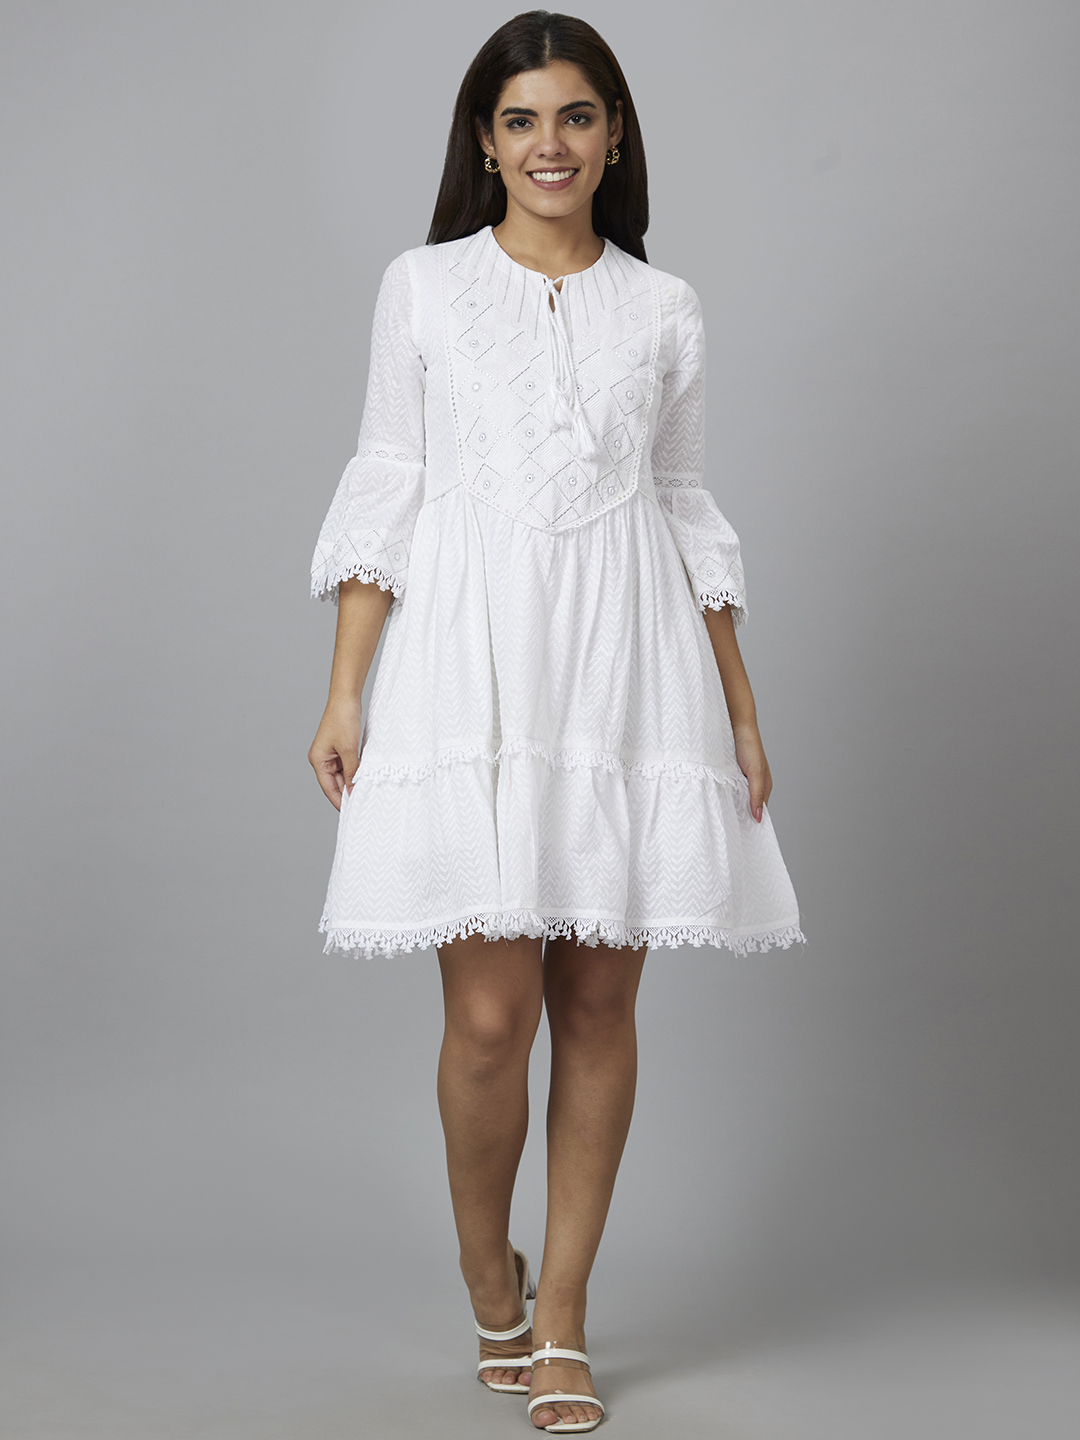 Globus Women Ivory Embroidered A-Line Dress